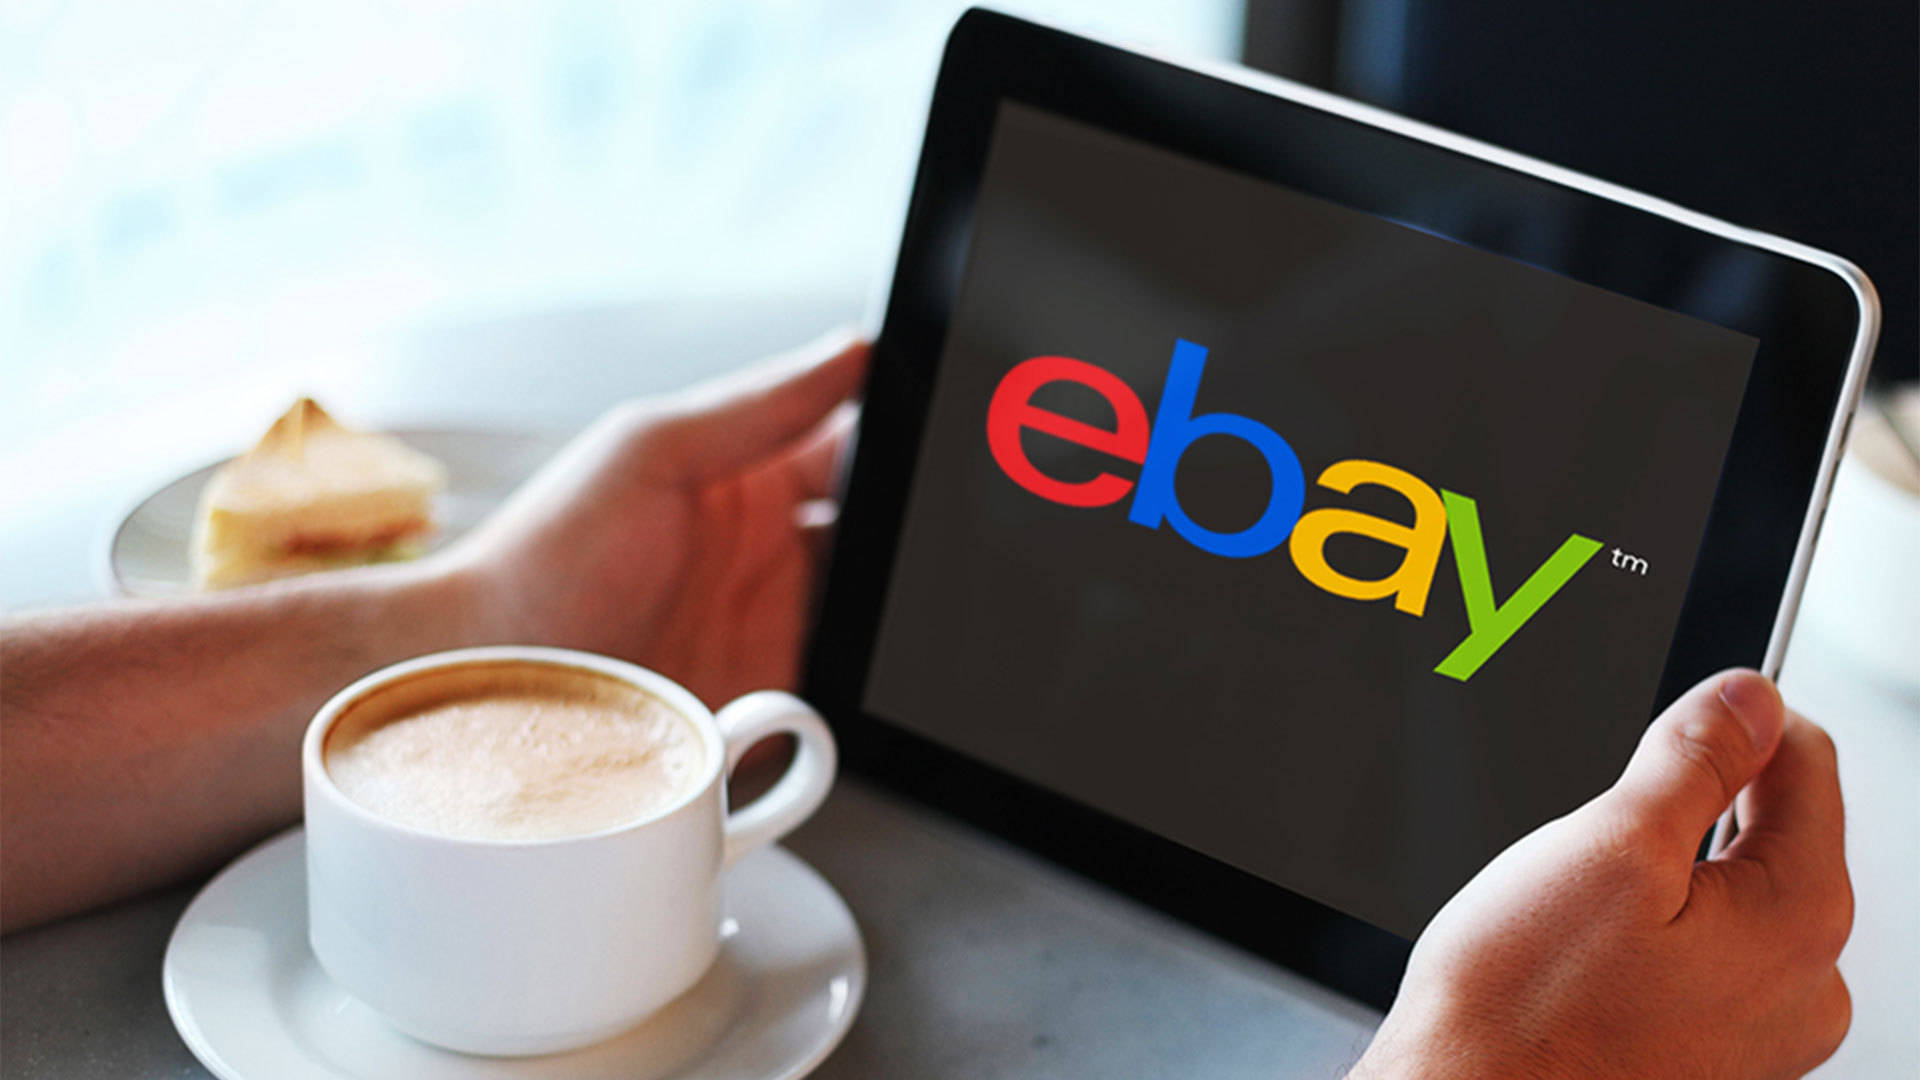 Ebay And Coffee Background